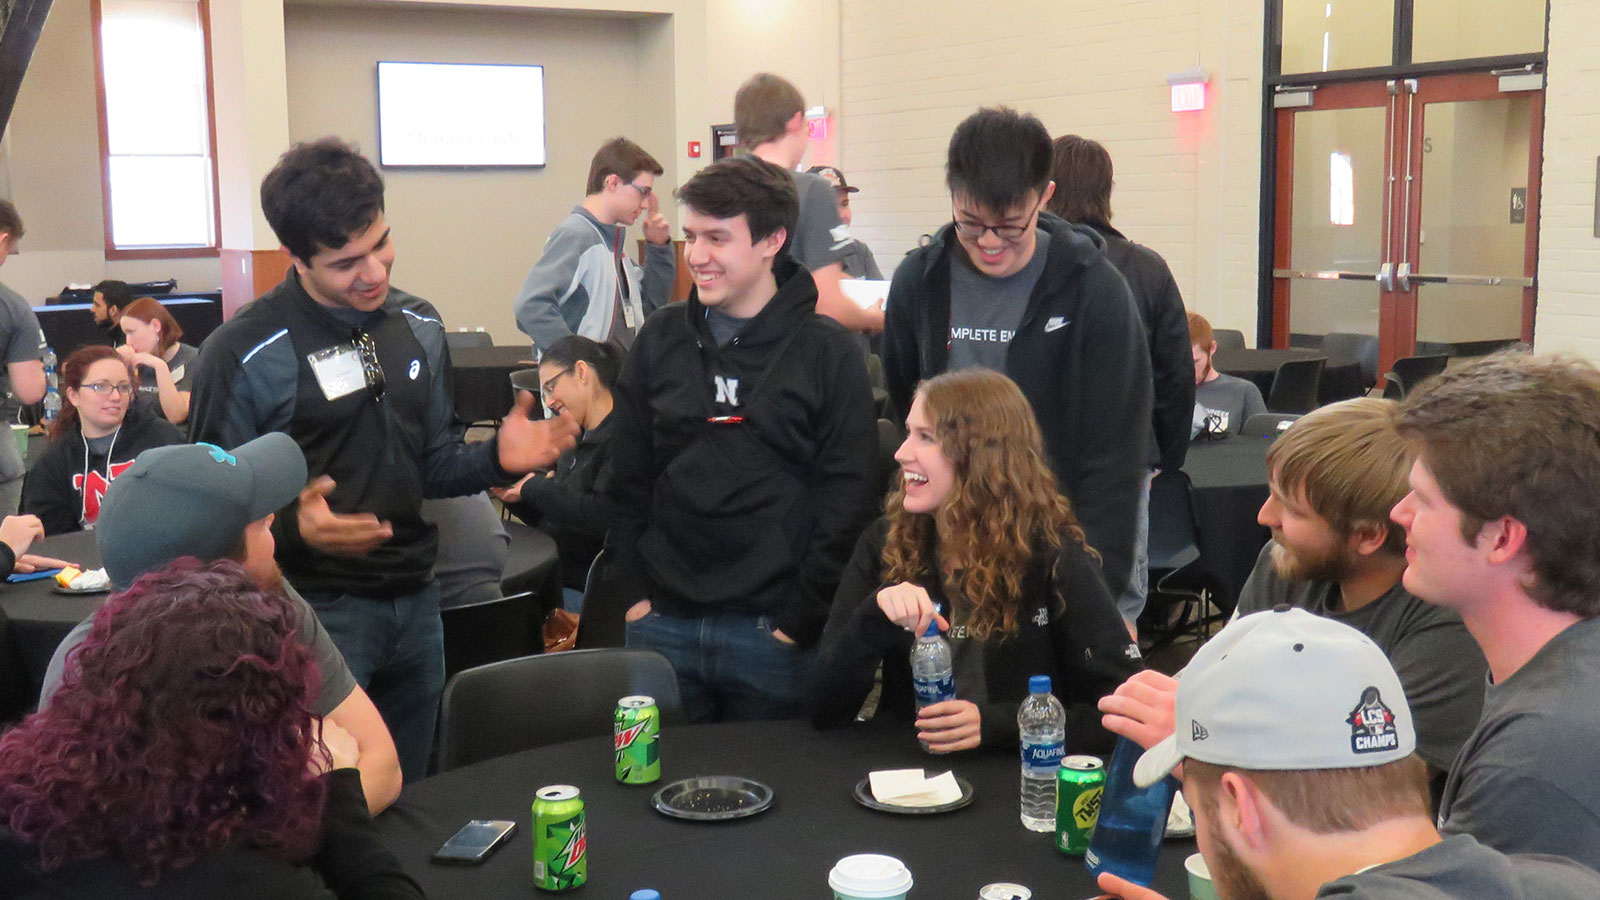 Students sitting in a group laughing.